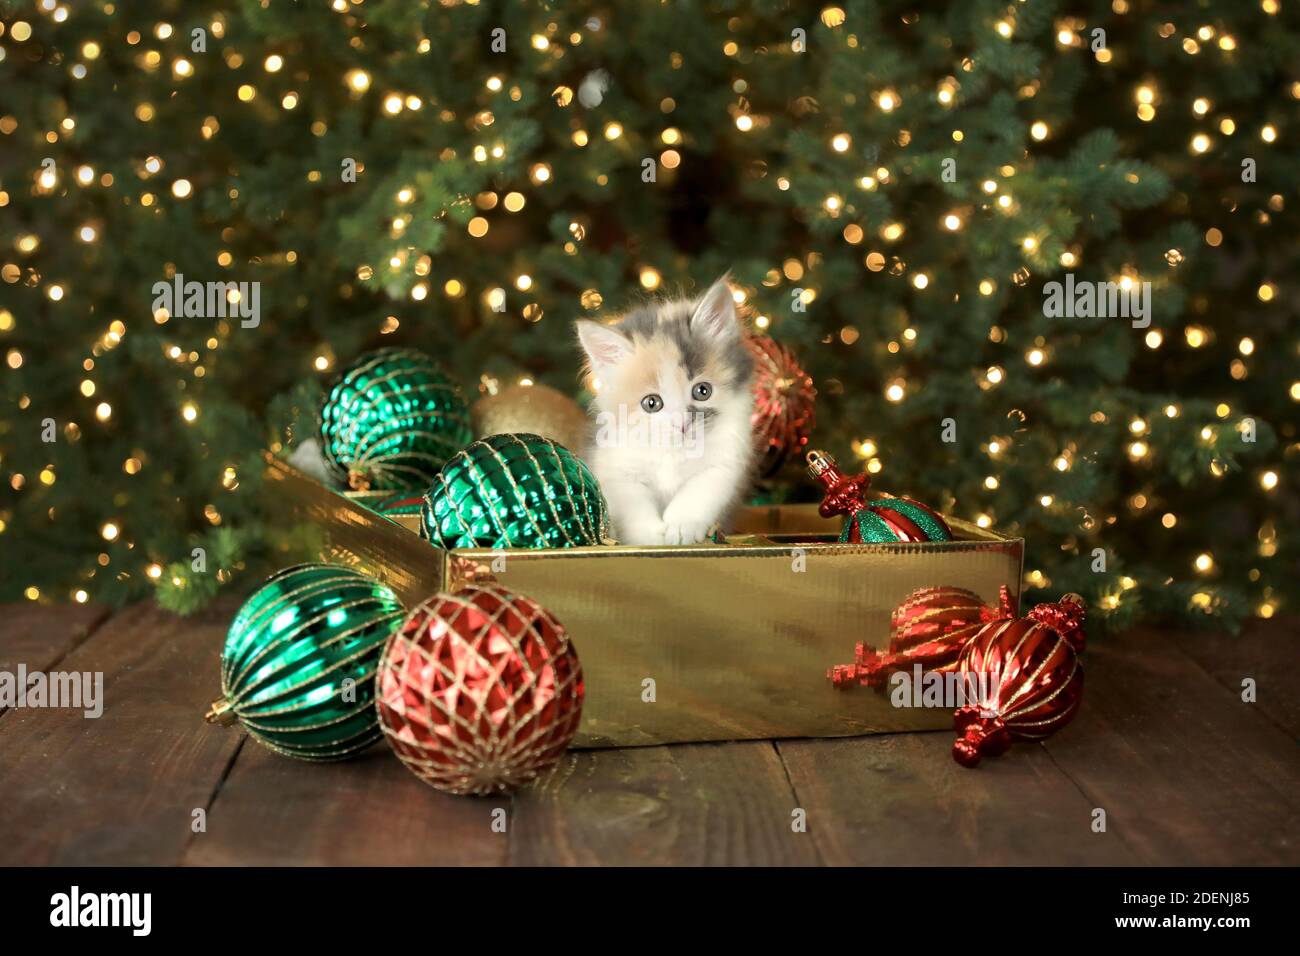 Cute Curious Kitten in an Ornament Box For Christmas Stock Photo